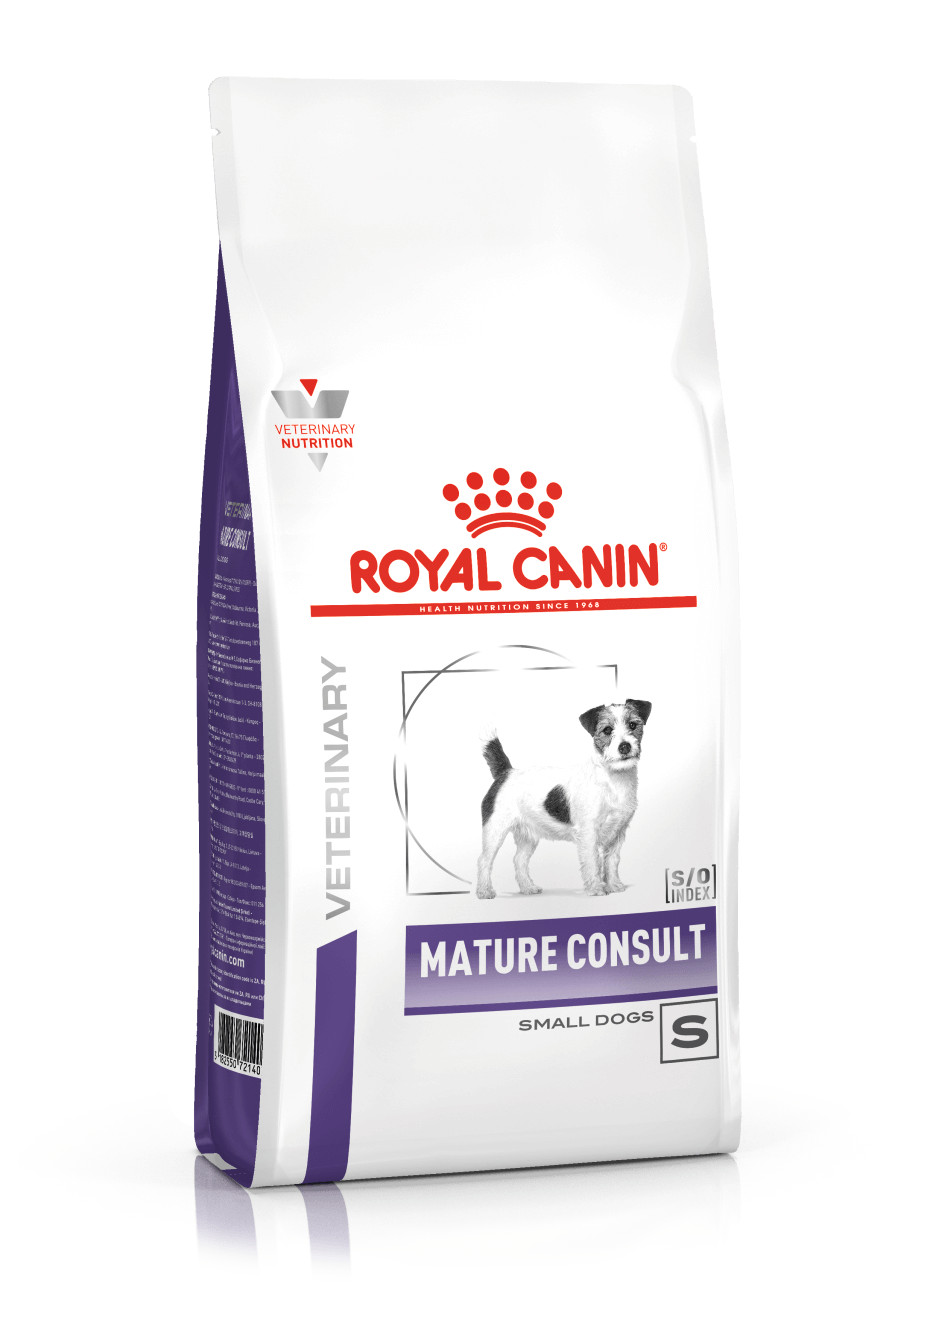 Royal Canin Veterinary Mature Consult Small Dogs hundefoder